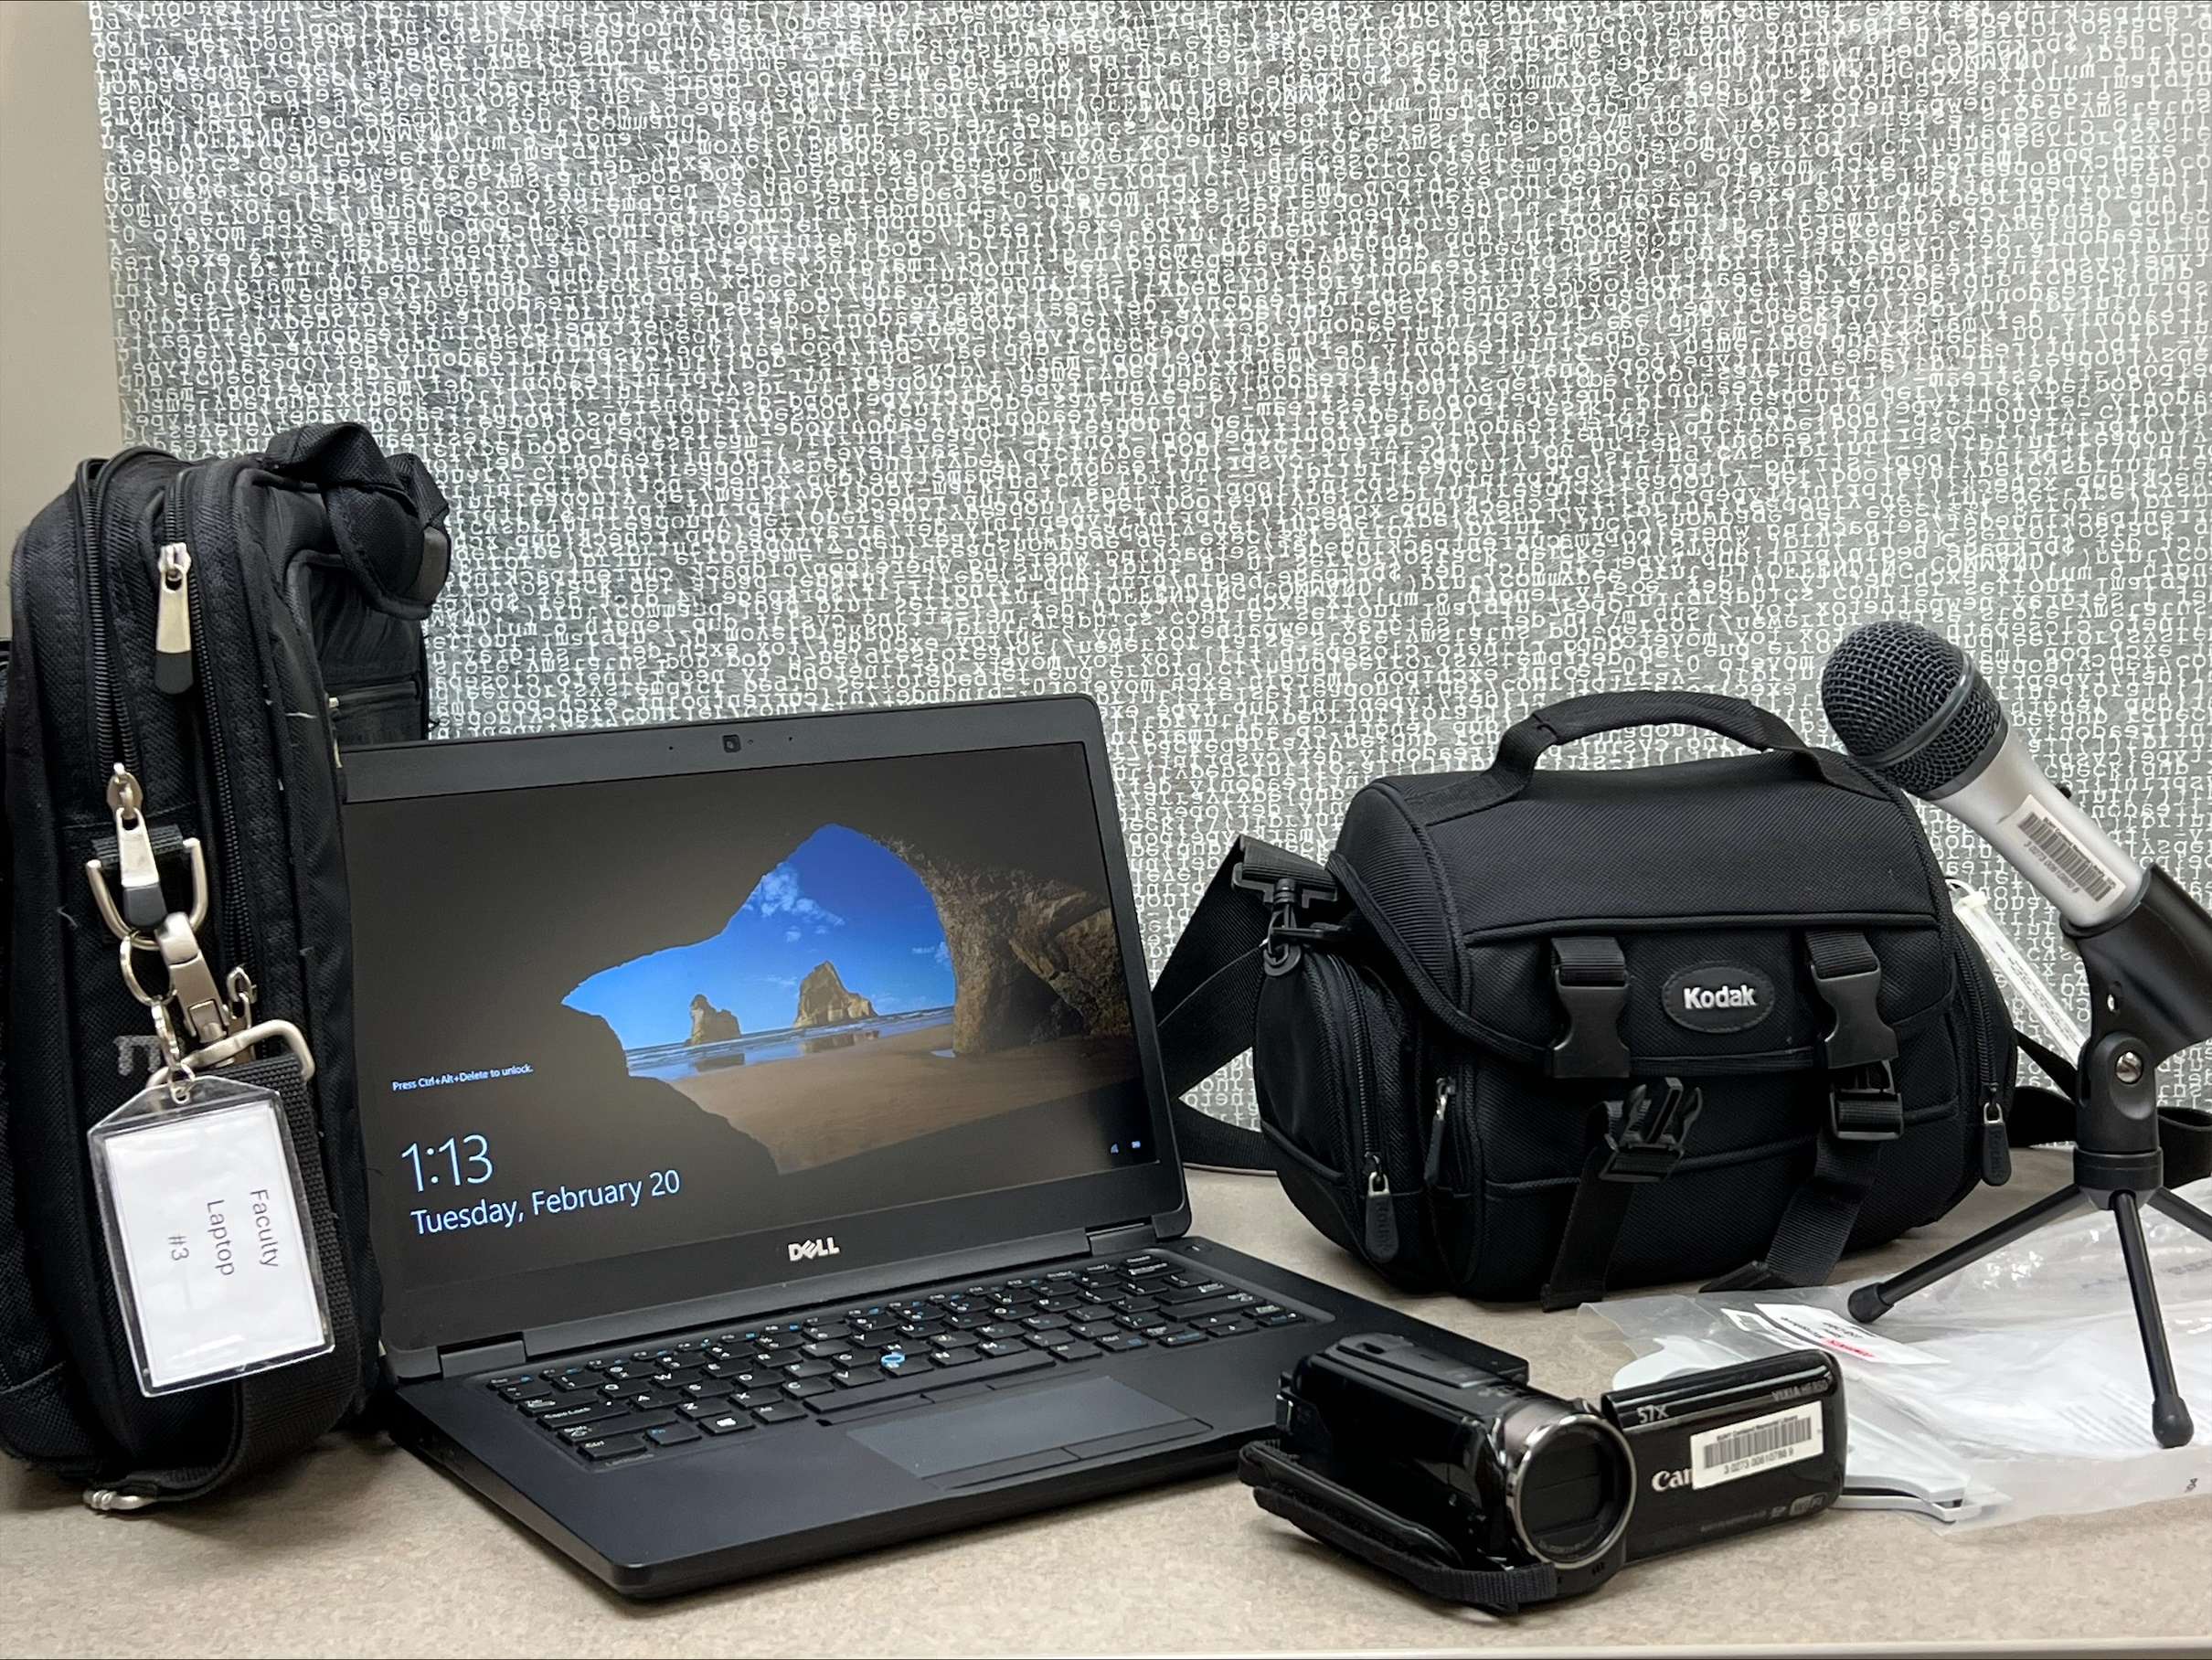 Image of various equipment available to loan - laptop, video camera and microphone